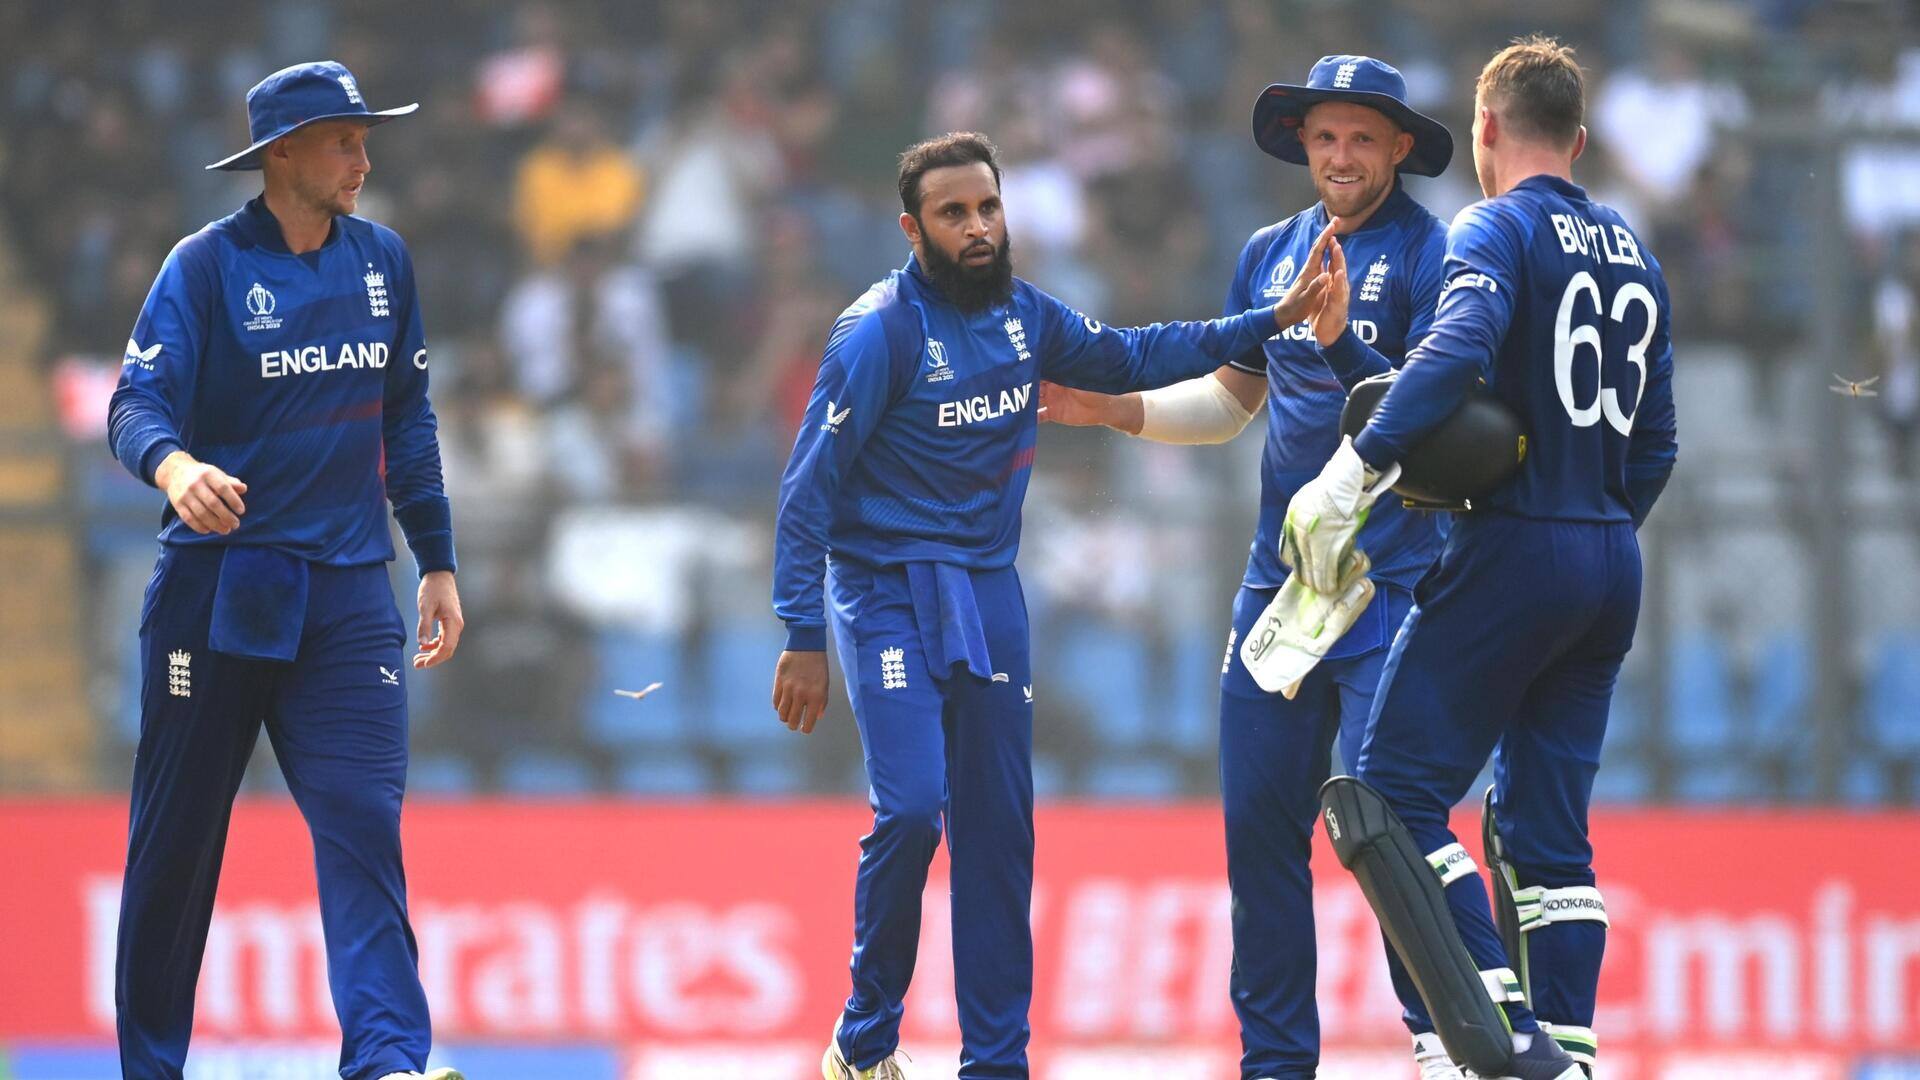 ICC Cricket World Cup, England vs Sri Lanka: Statistical preview